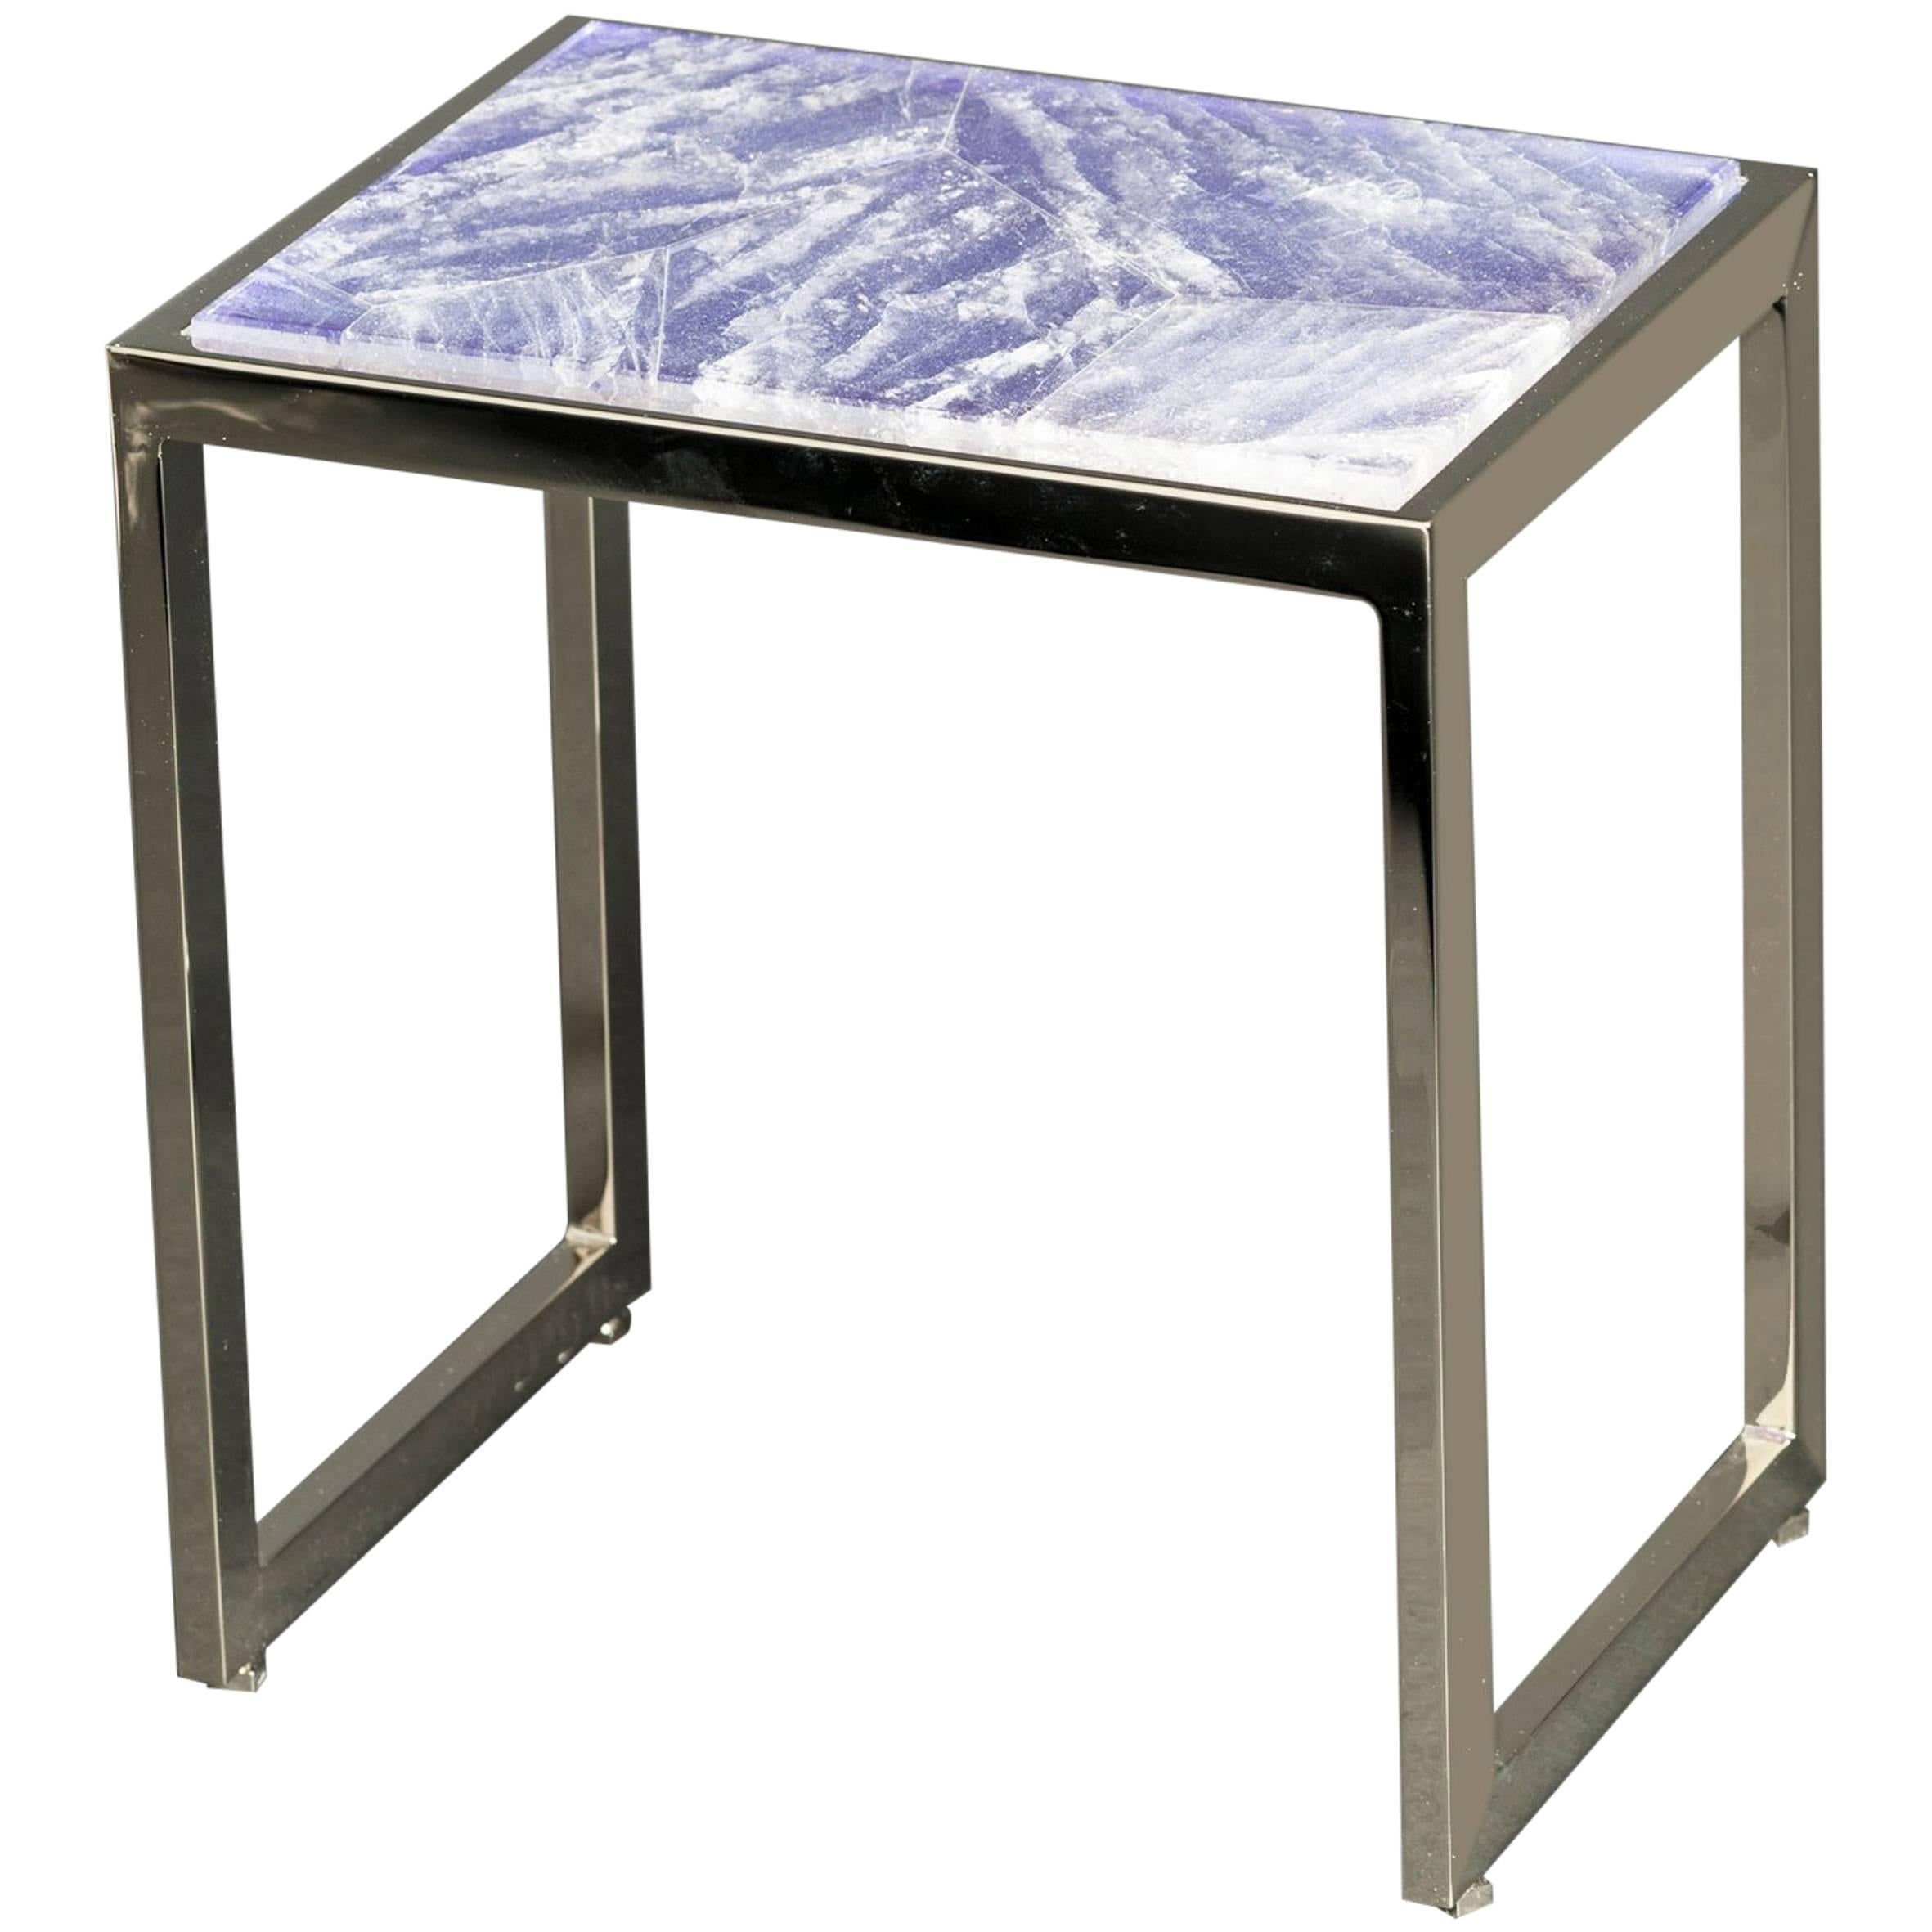 Hyaline Violet Quartz Side Table by Giuliano Tincani, Made in Italy For Sale